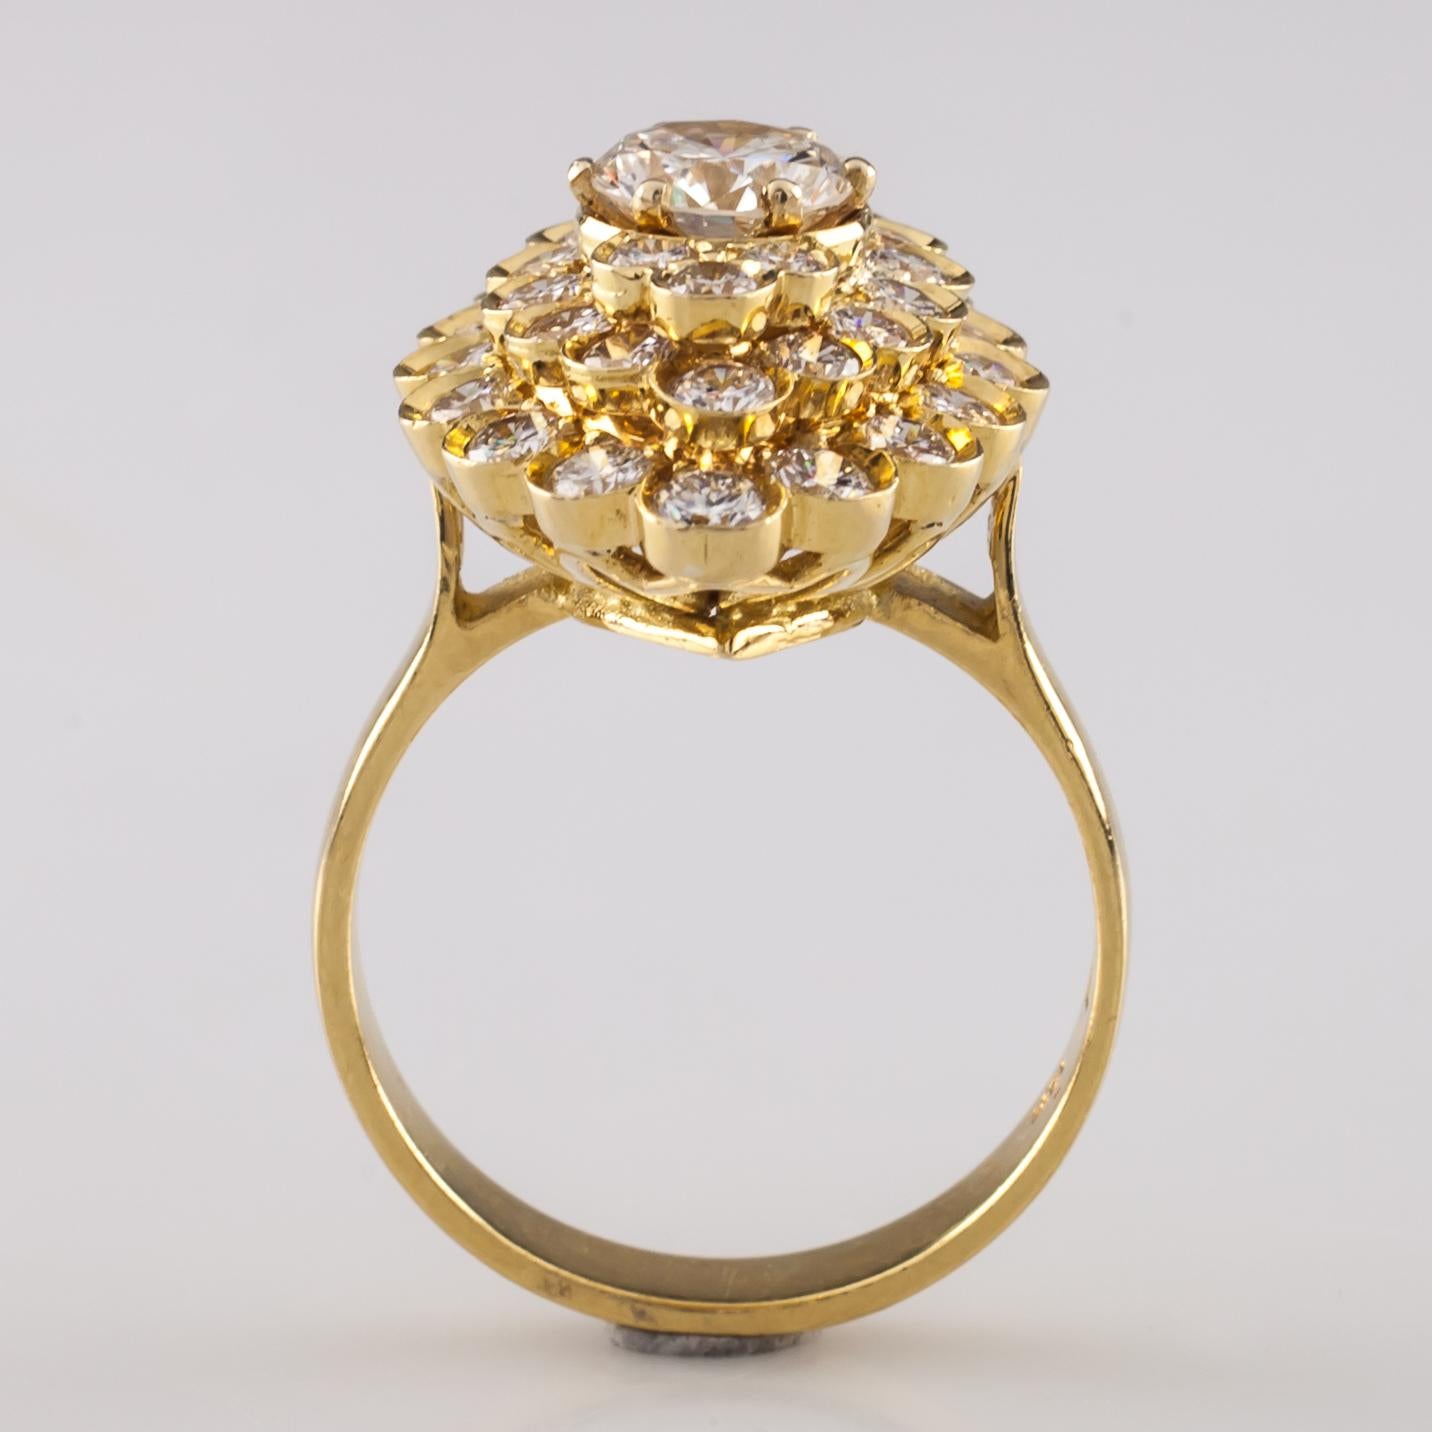 2.72 Carat Diamond Solitaire 18 Karat Gold Cluster Ring with GIA Certified In Excellent Condition For Sale In Sherman Oaks, CA